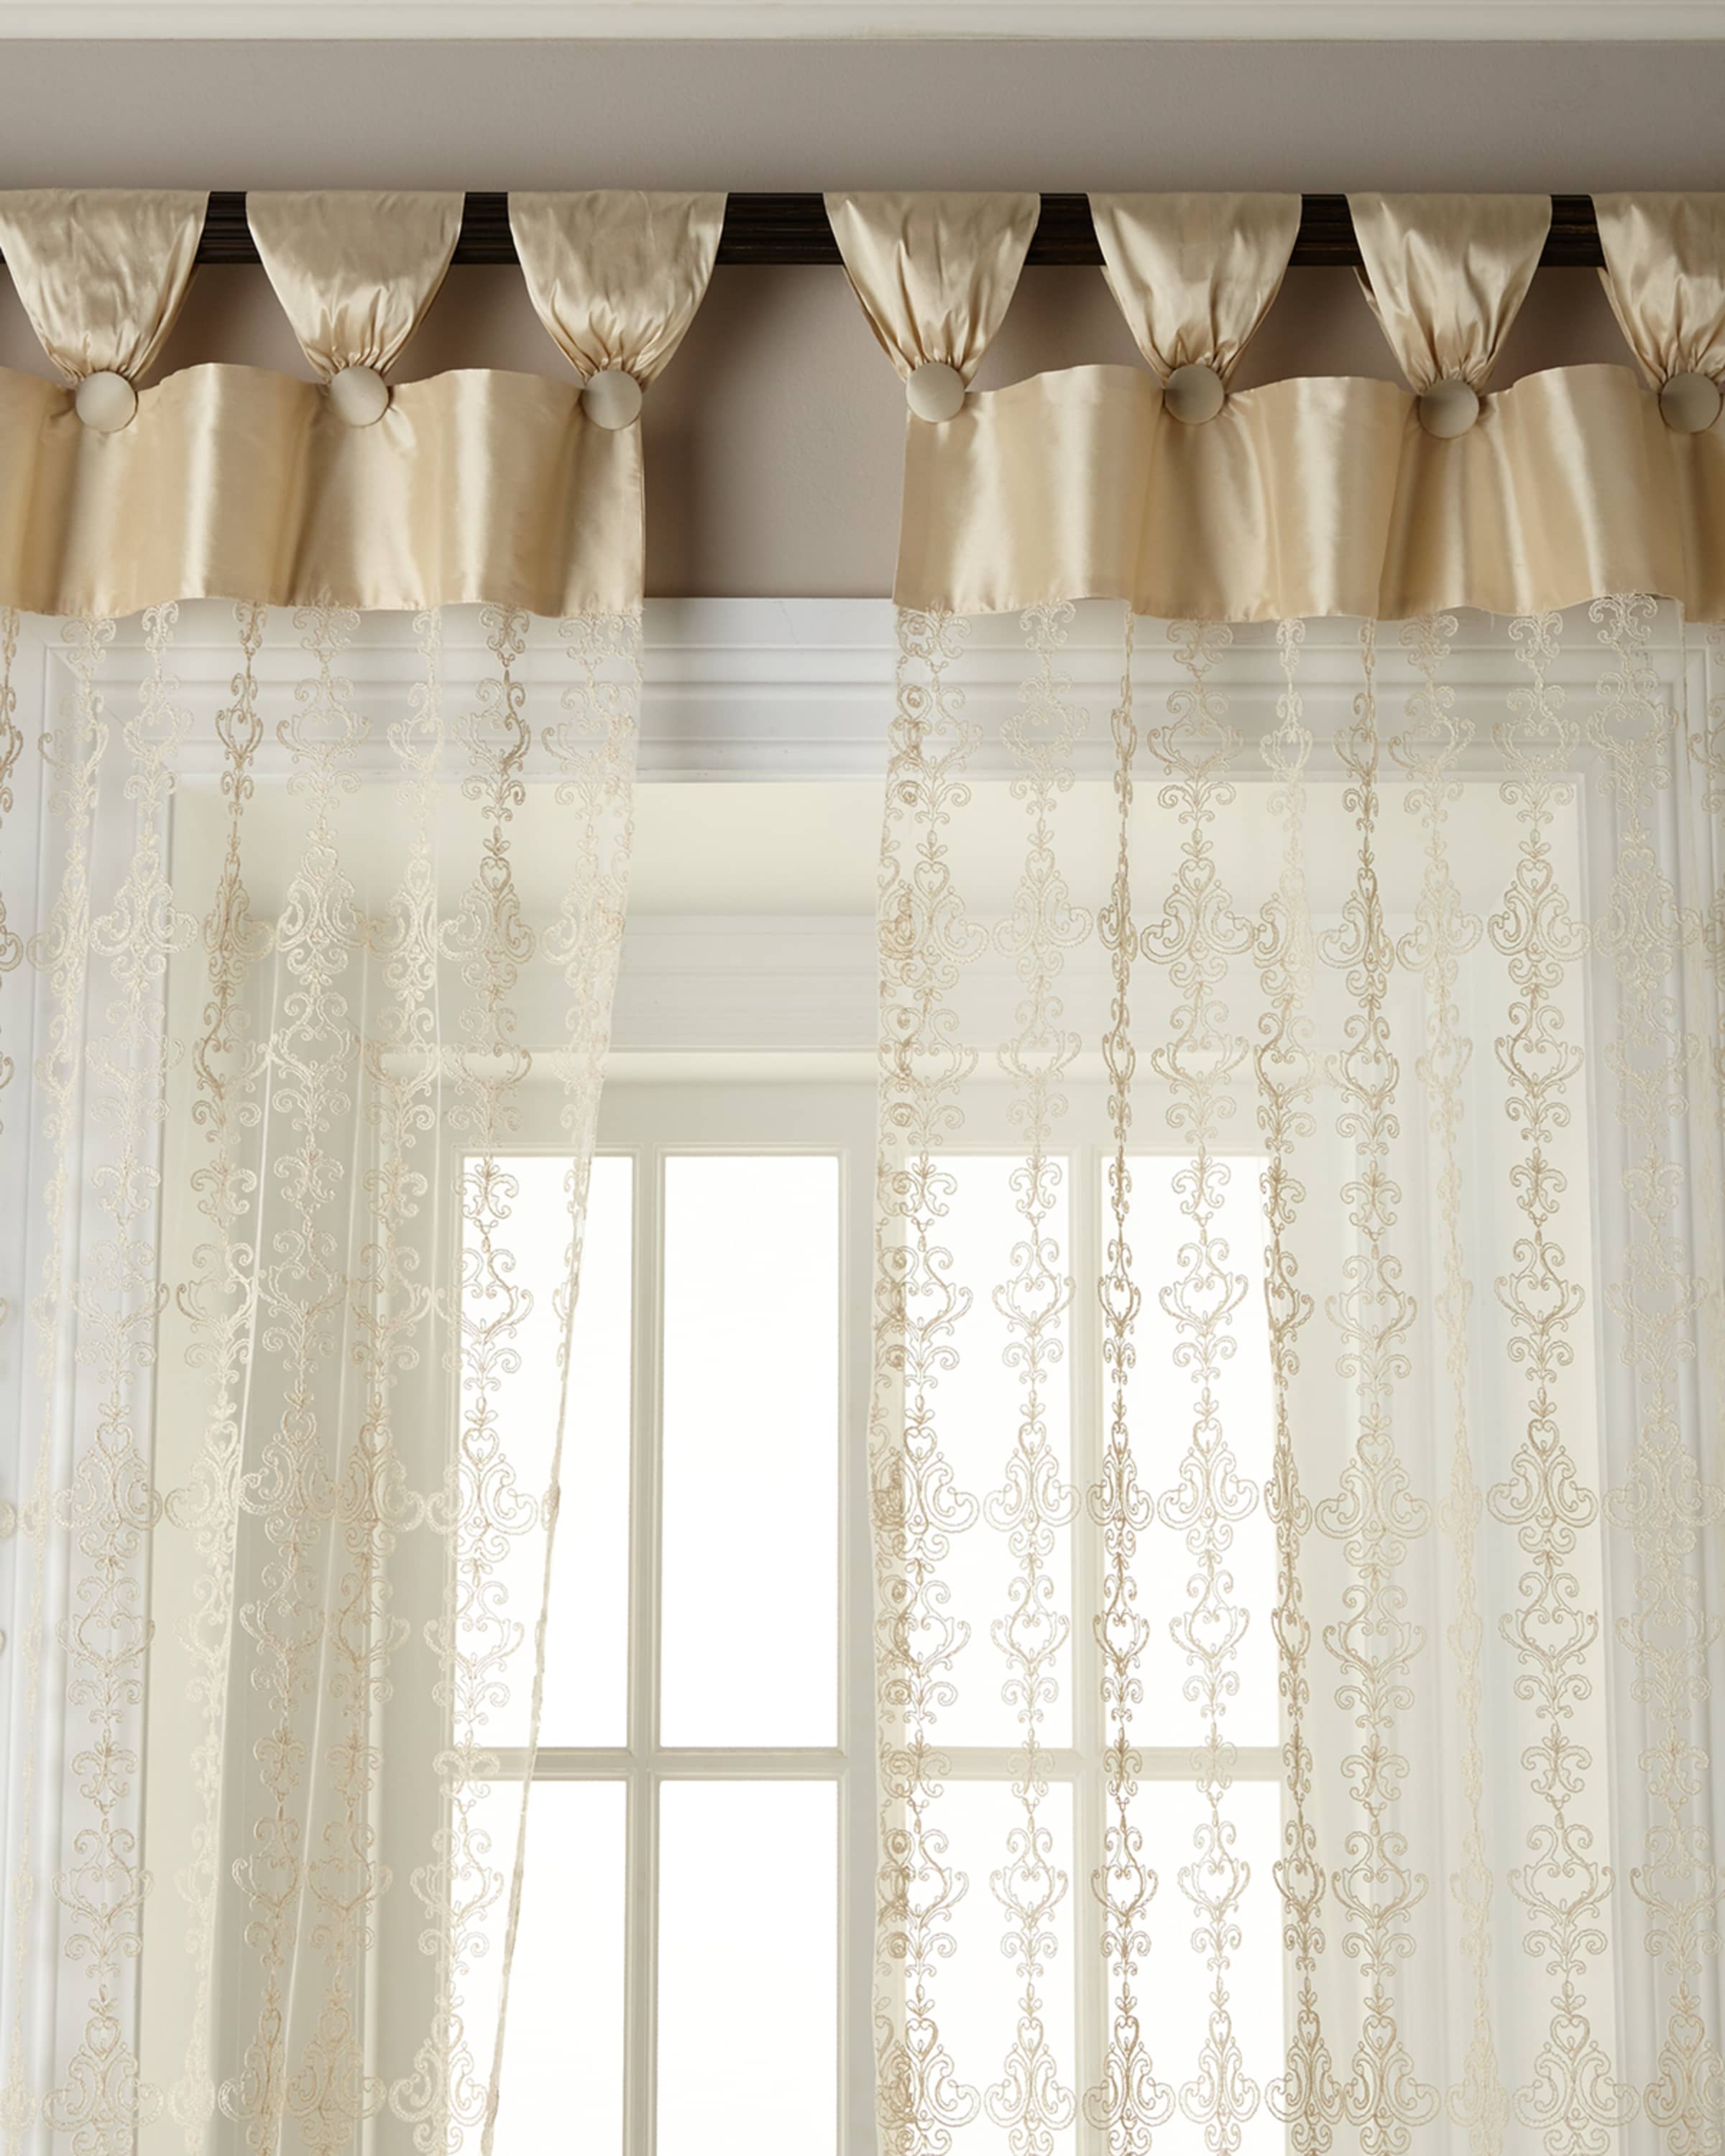 Sweet Dreams Elizabeth Lace Curtains & Matching Items | Horchow